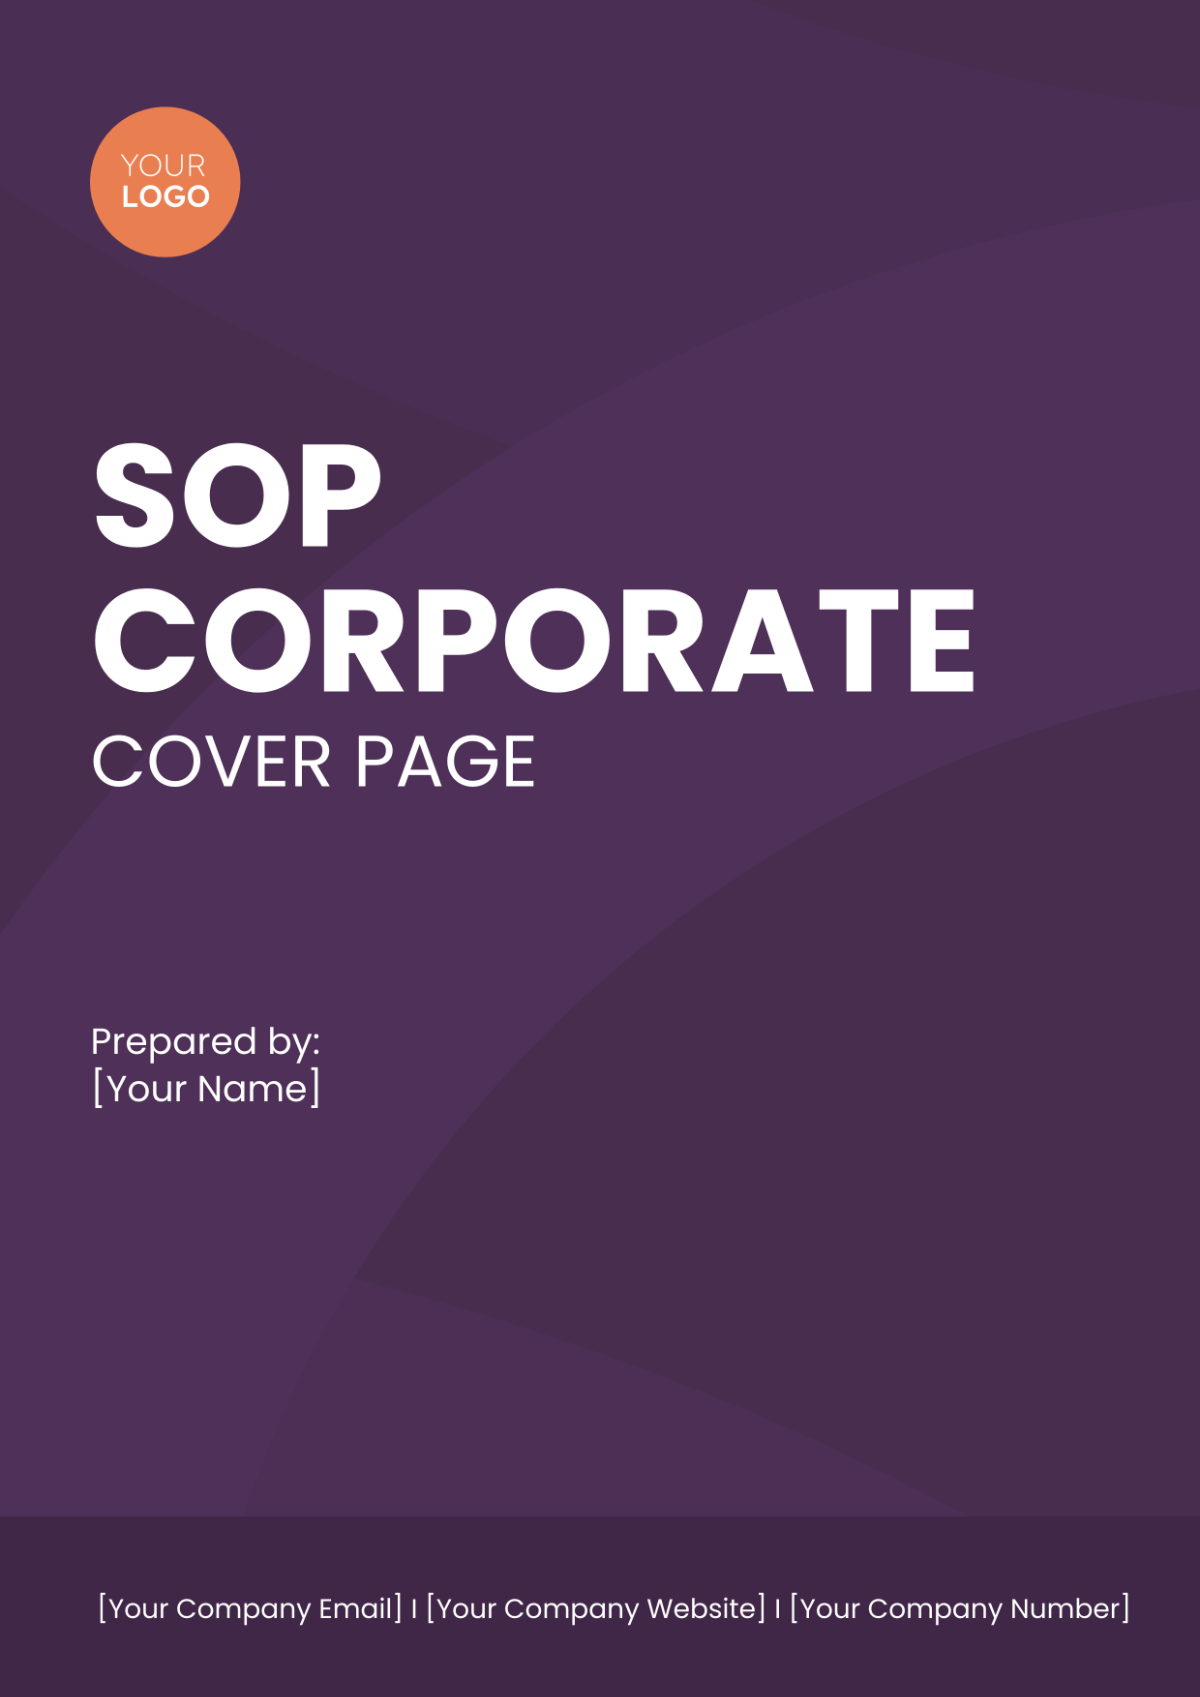 SOP Corporate Cover Page